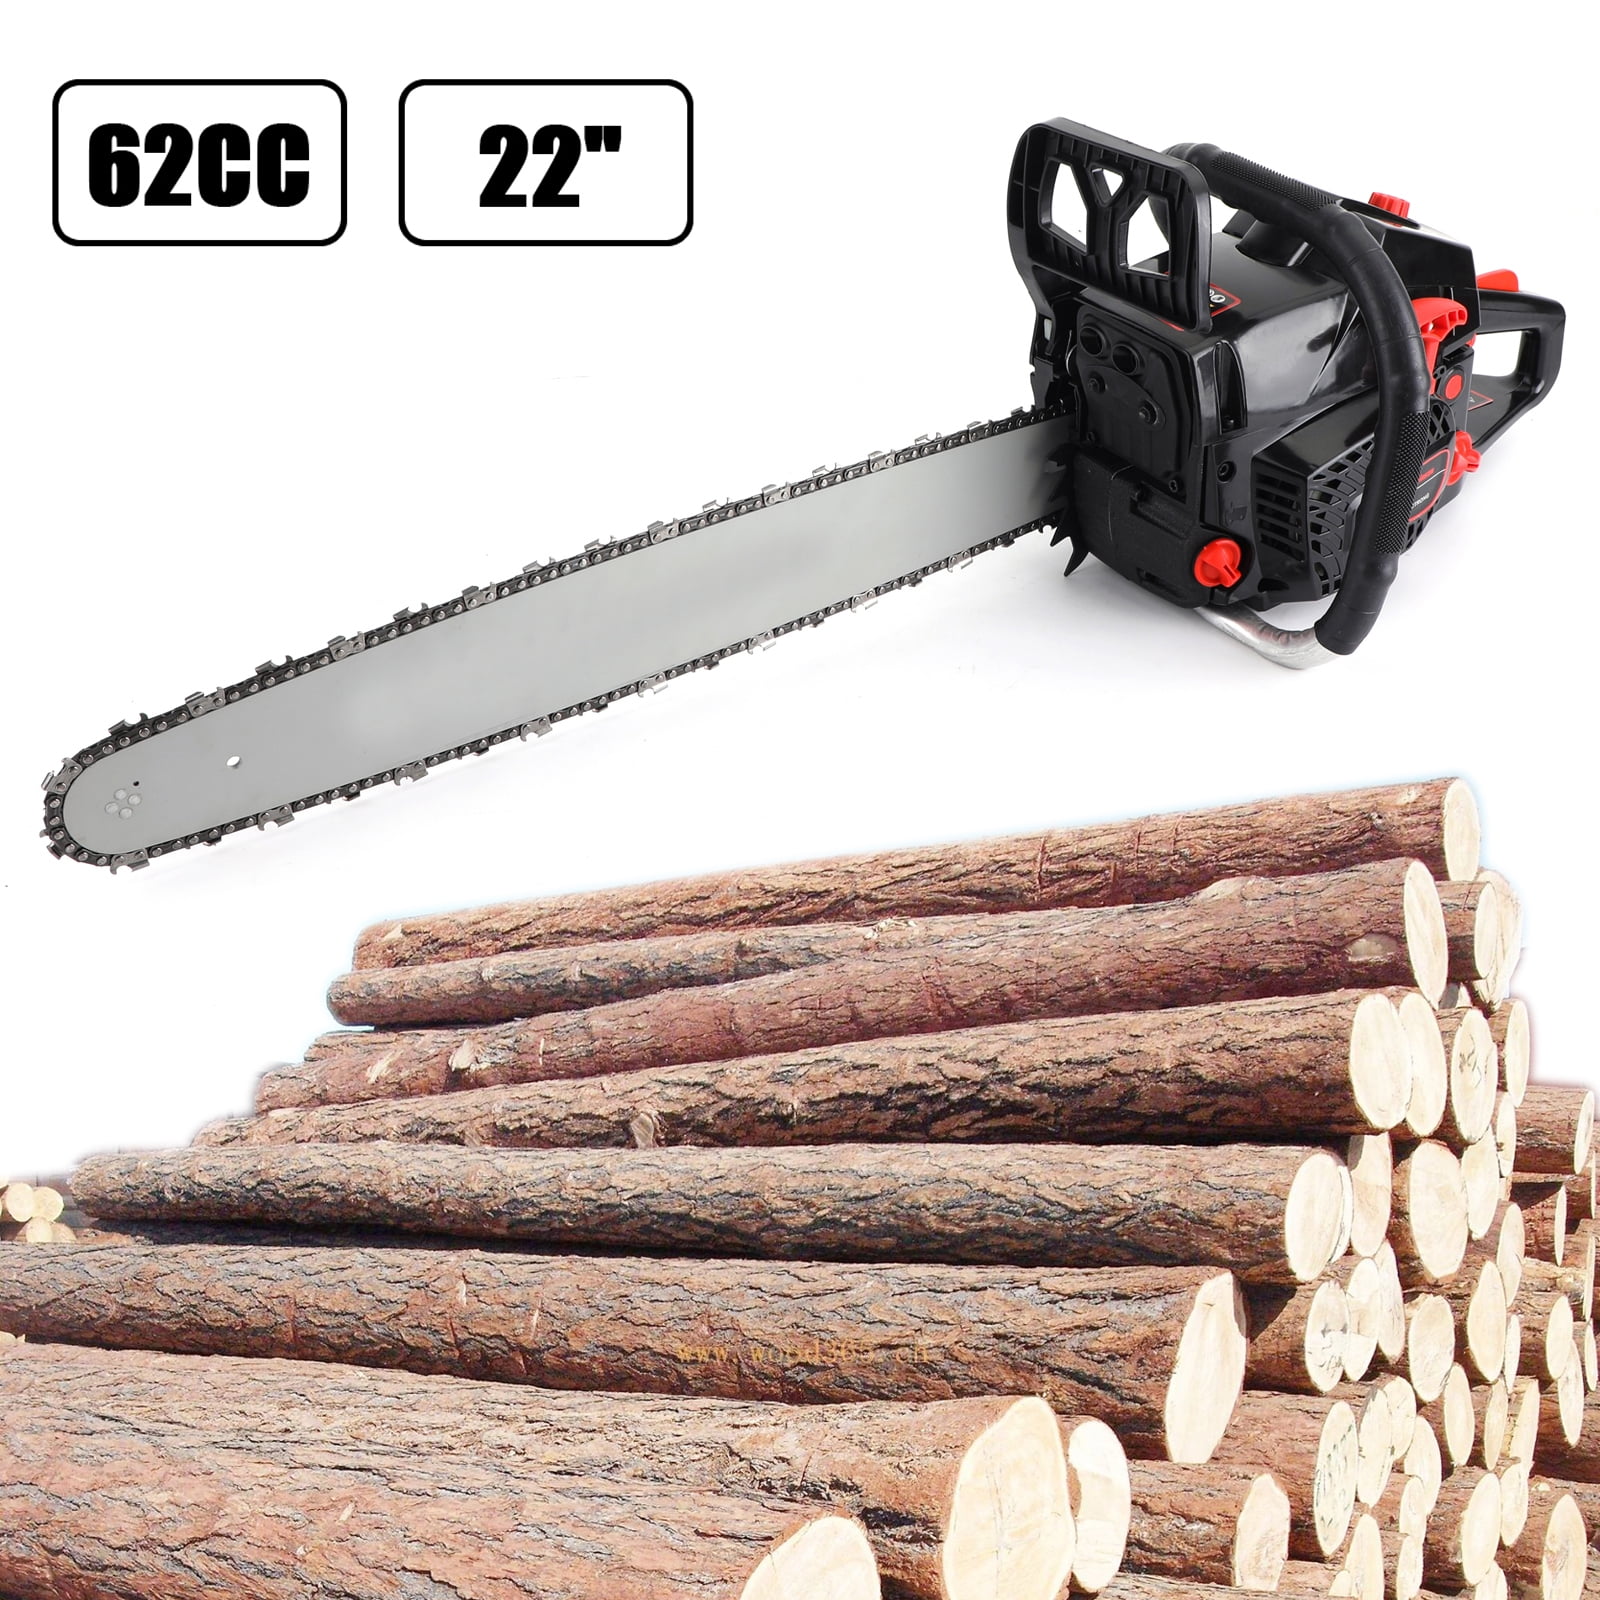 Details about   COOCHEER 62CC 20" Gas Chainsaw 2 Stroke Handed Petrol Chain Woodcutting 4 B e 07 